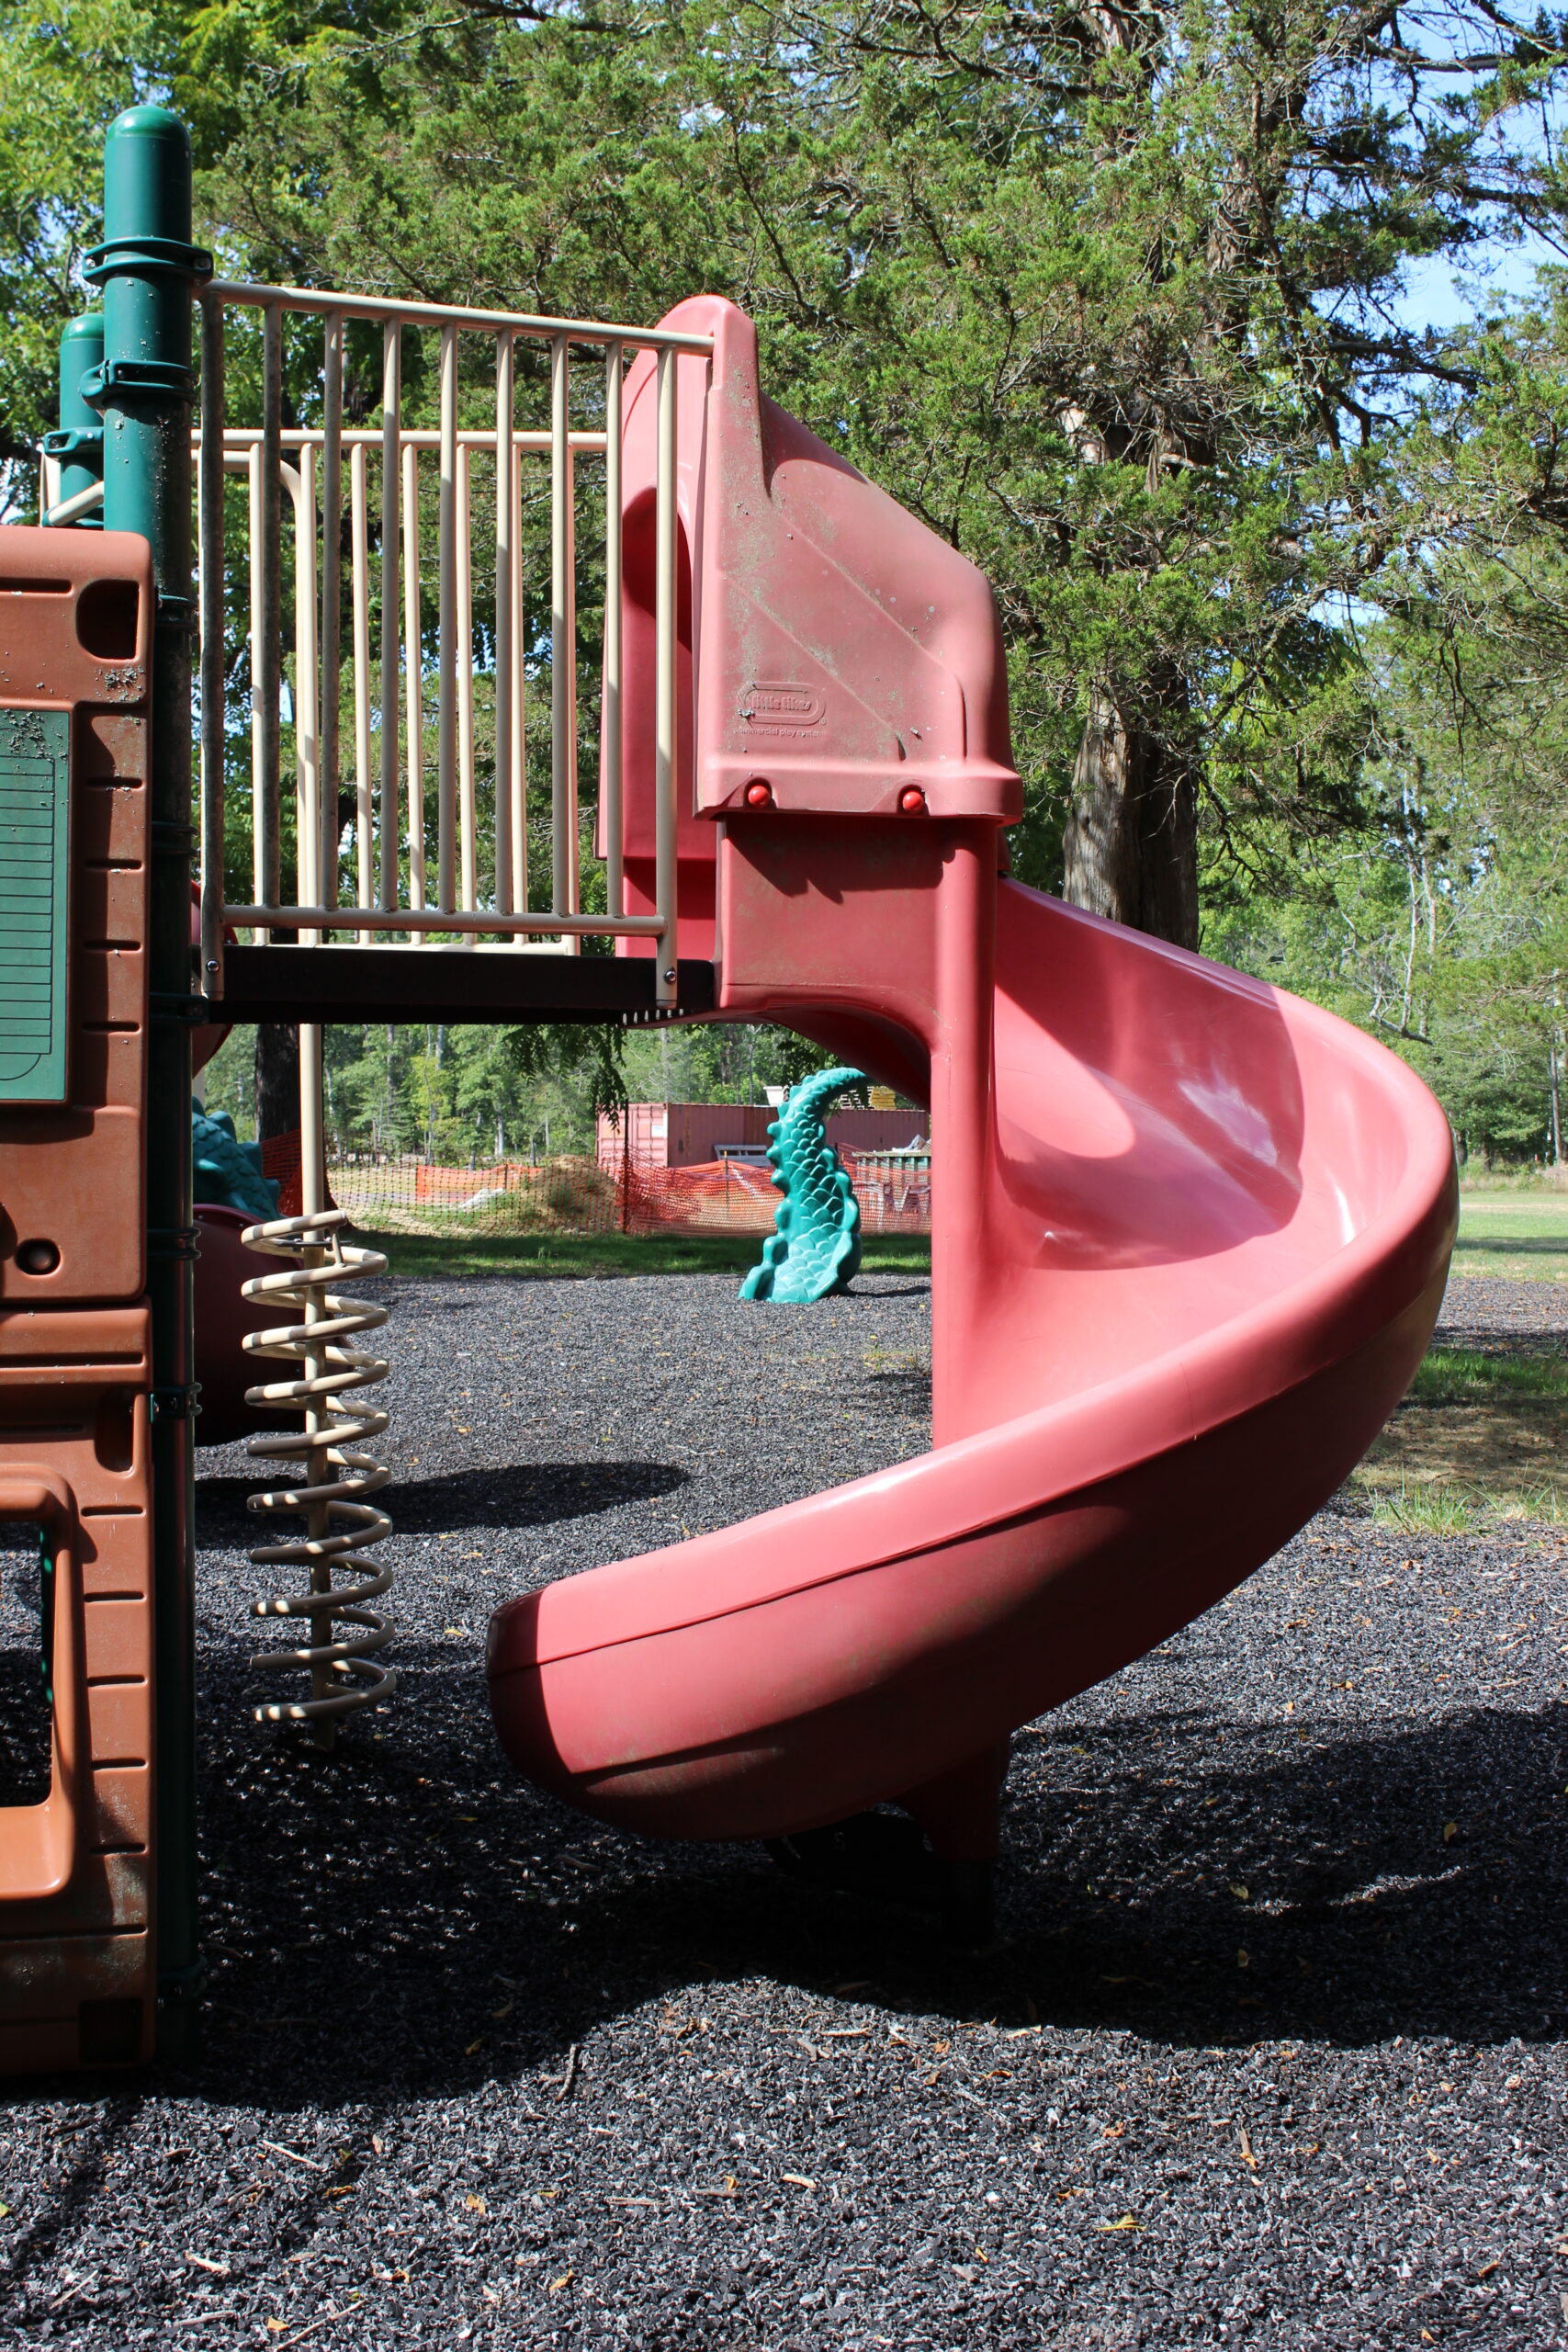 Back Estell Manor Park Playgrounds in Mays Landing NJ - SLIDES - open twisting slide on the pirate ship playground